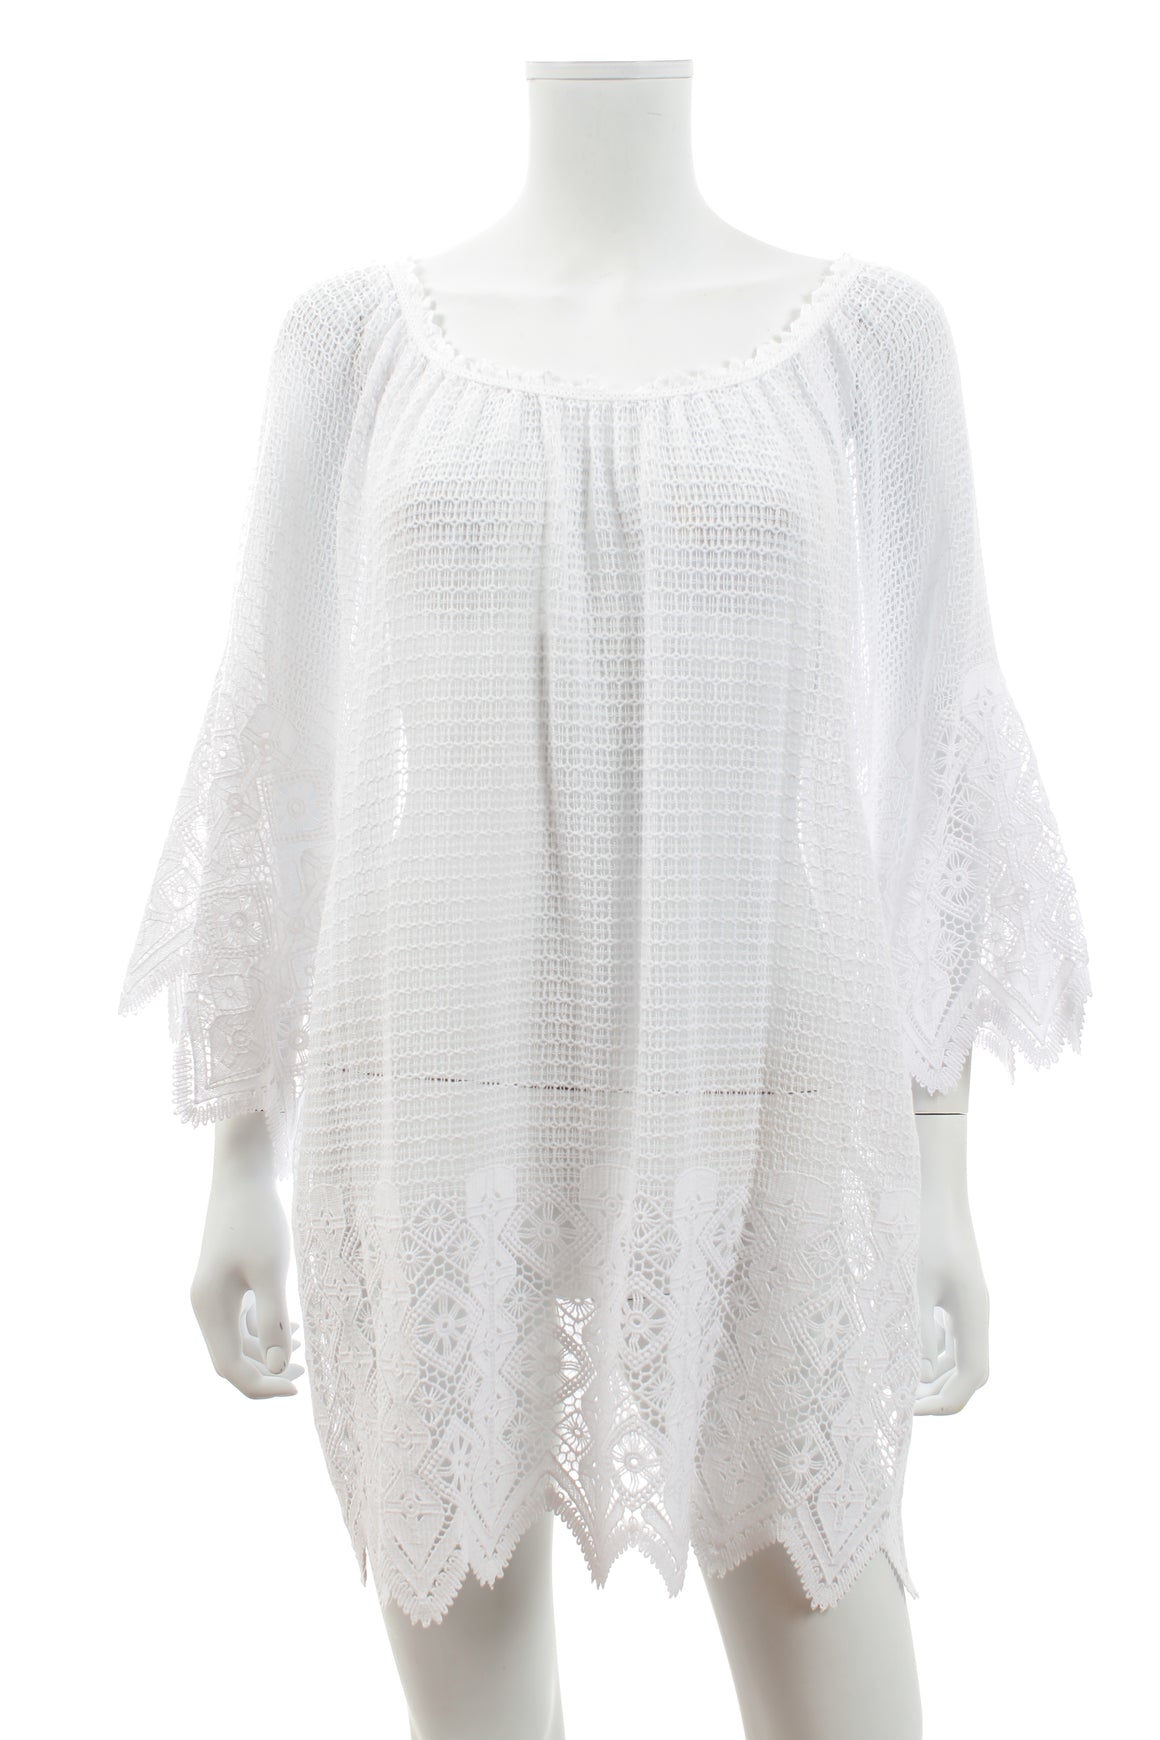 Miguelina Crochet-Lace Cotton Cover Up